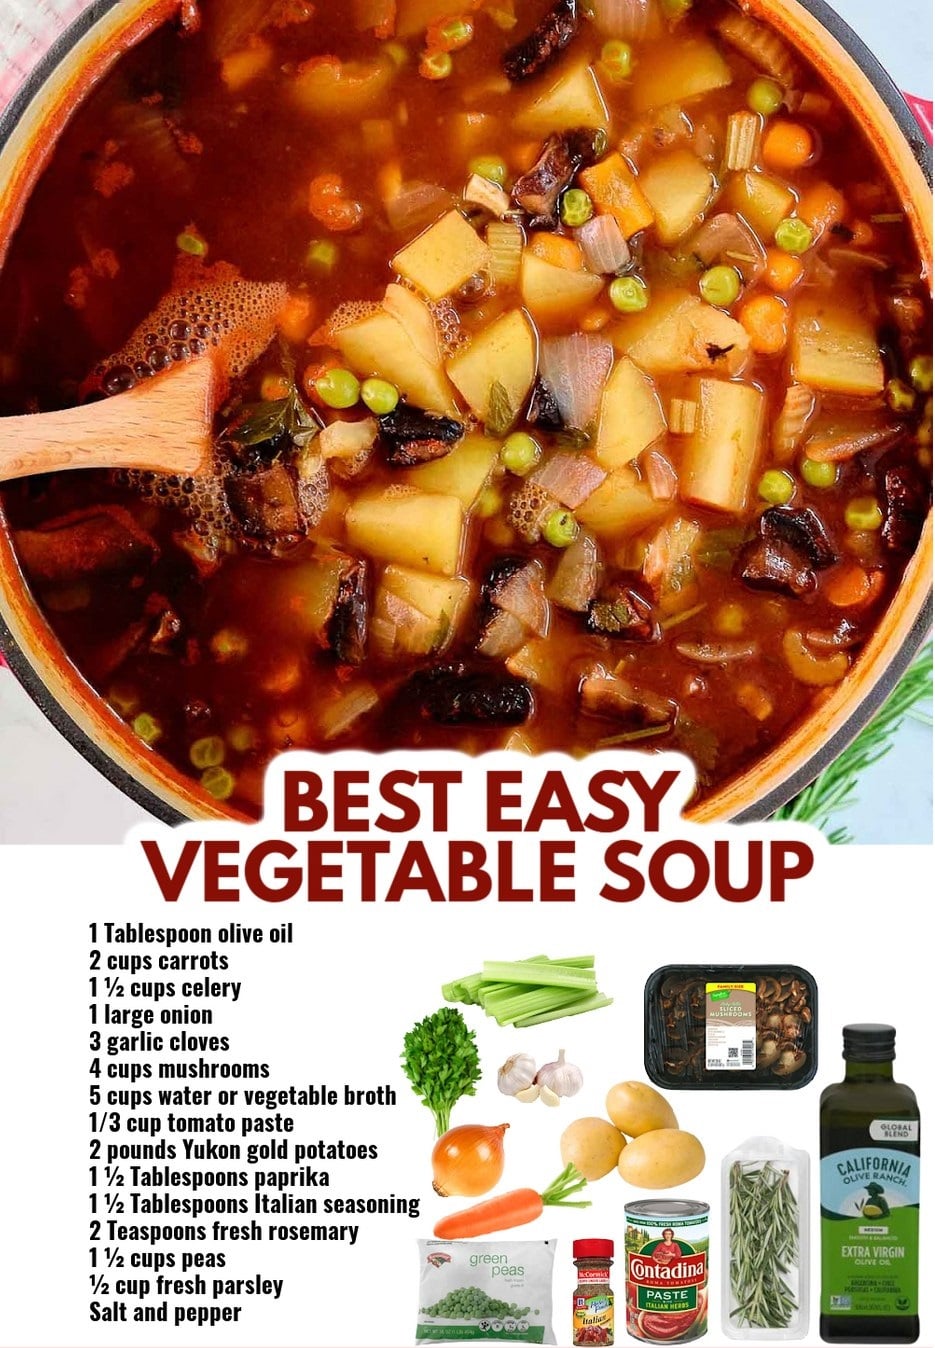 Best Easy Vegetable Soup - My Recipe posts